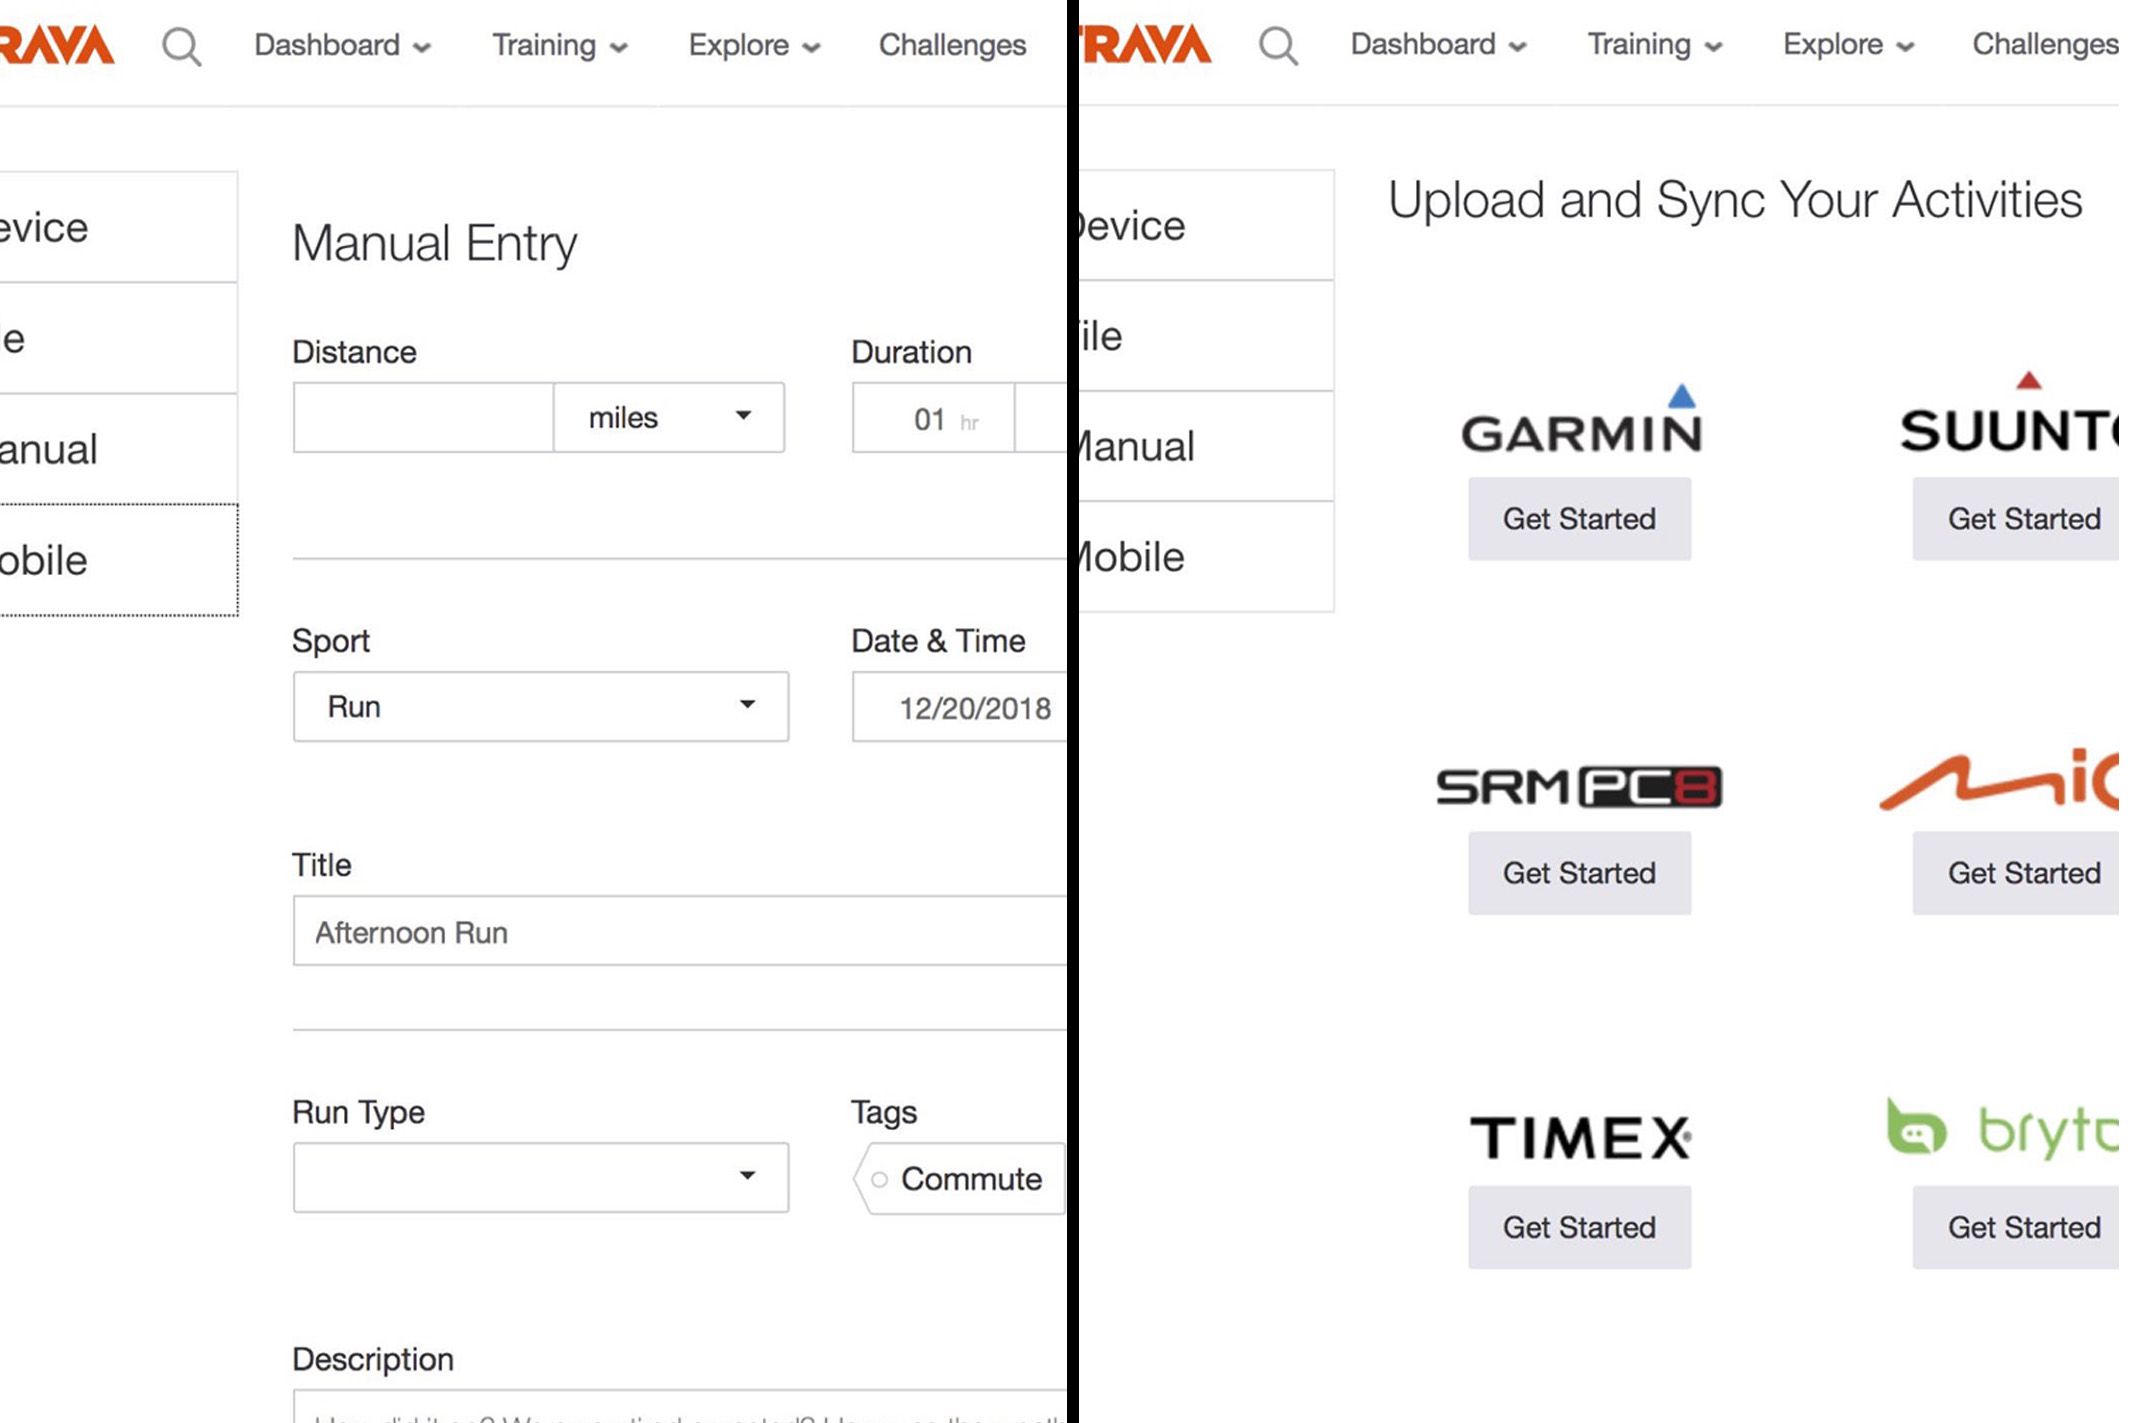 How to Use Strava's Fitness & Freshness Tool